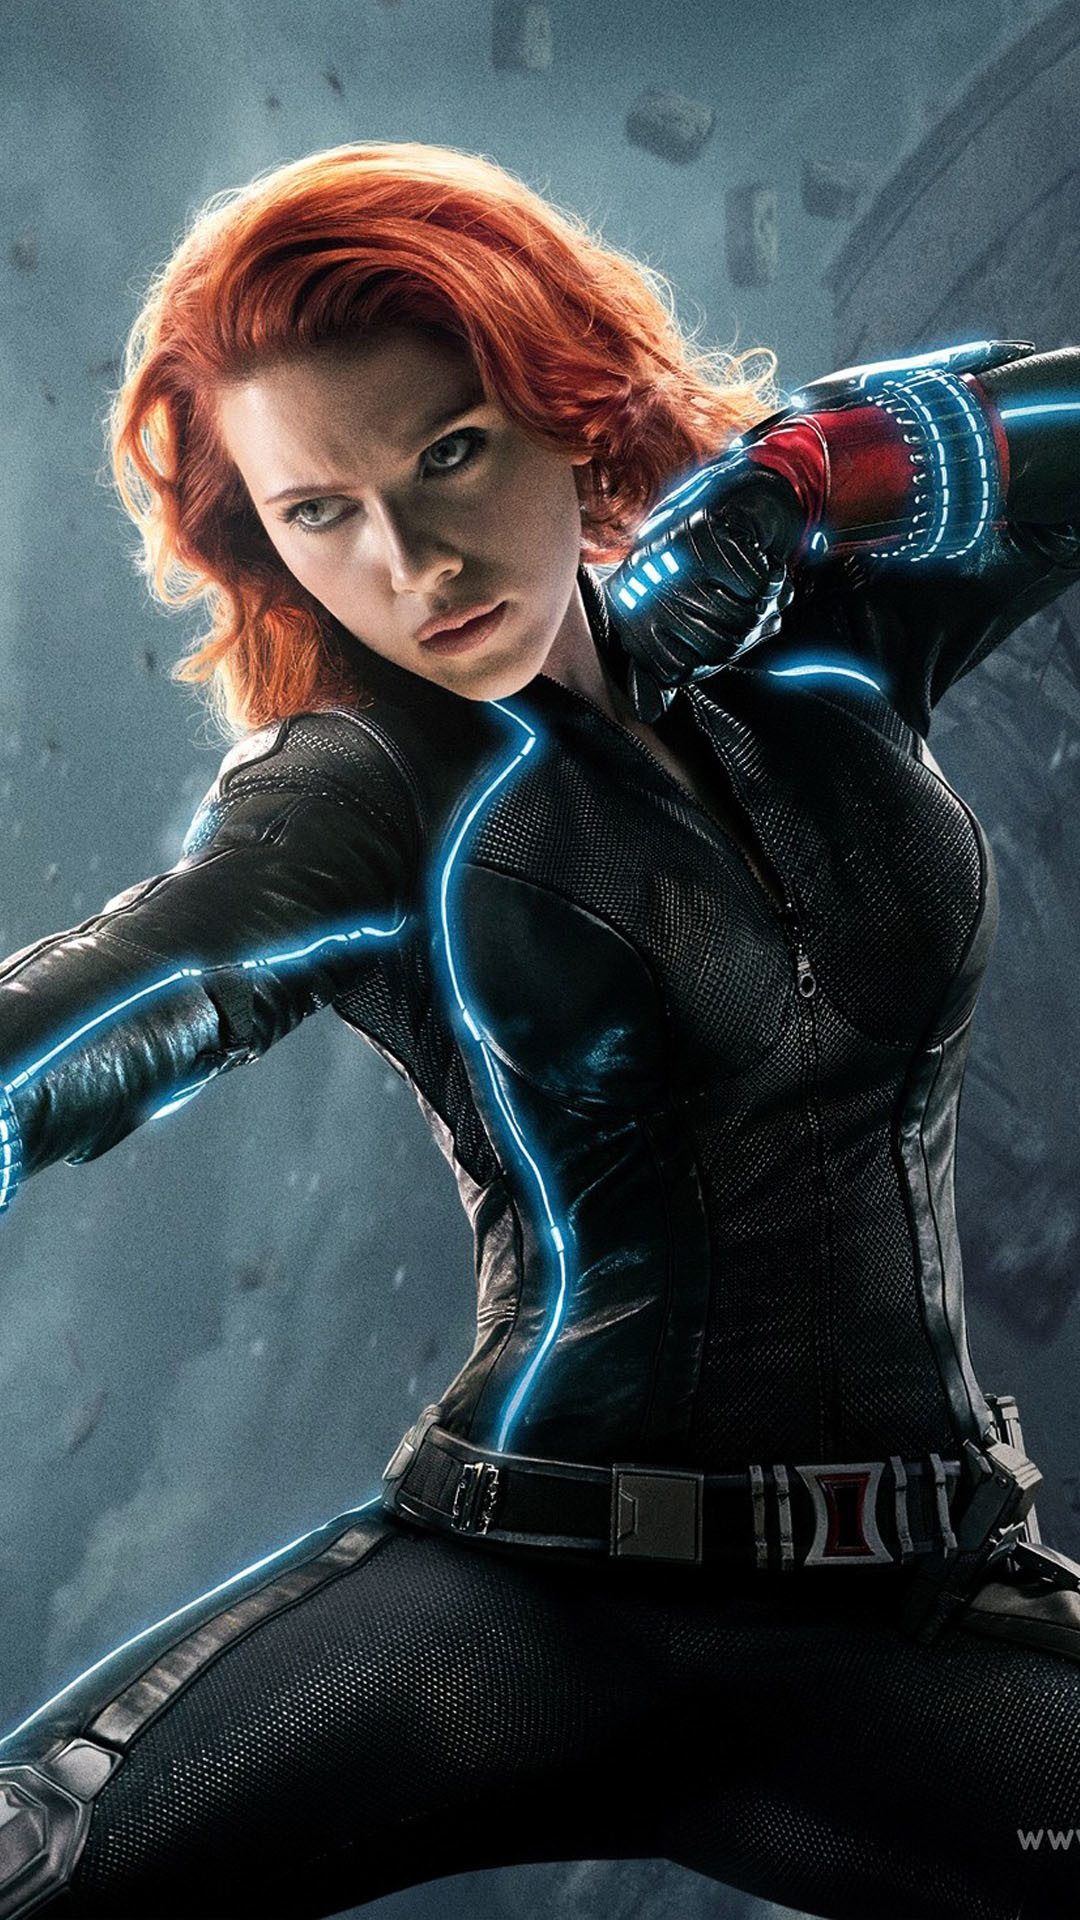 1080x1920 Avengers Age of Ultron Black Widow iPhone 6 / 6 Plus and iPhone Wallpapers